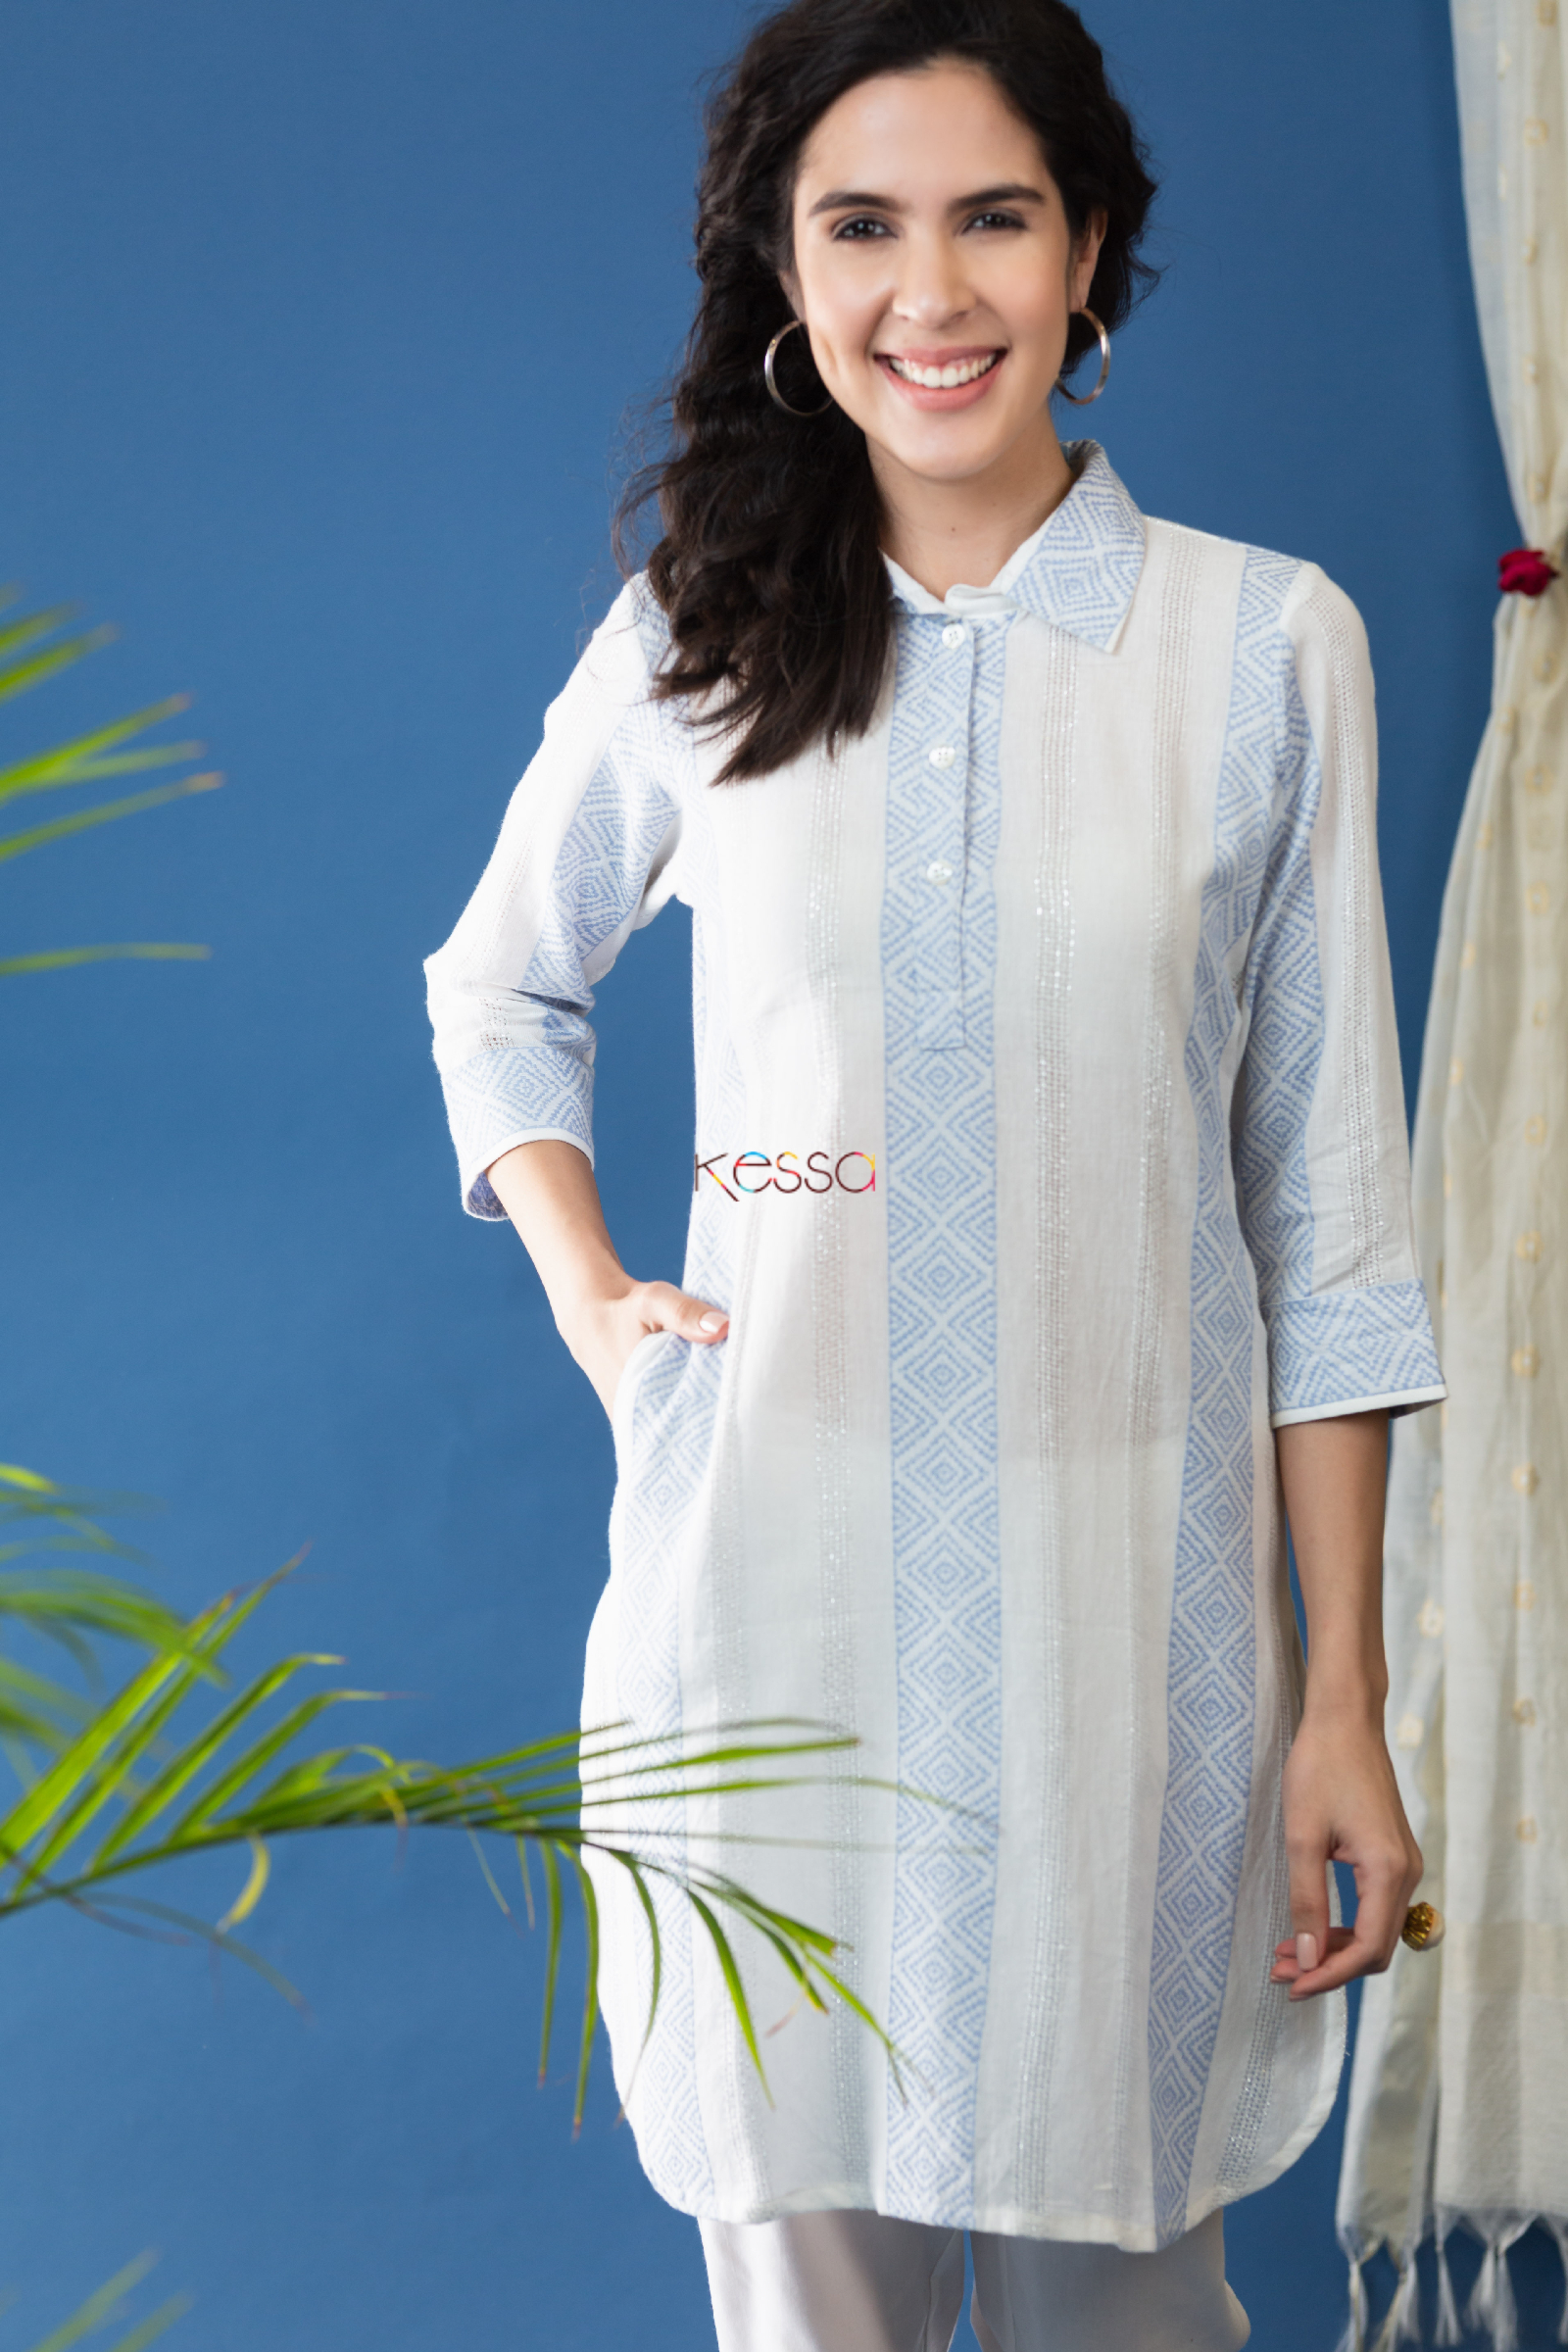 Buy Ada Hand Embroidered Cotton Lucknowi Chikankari White Short Kurti Top  Shirt for Women's A911250 (S) at Amazon.in